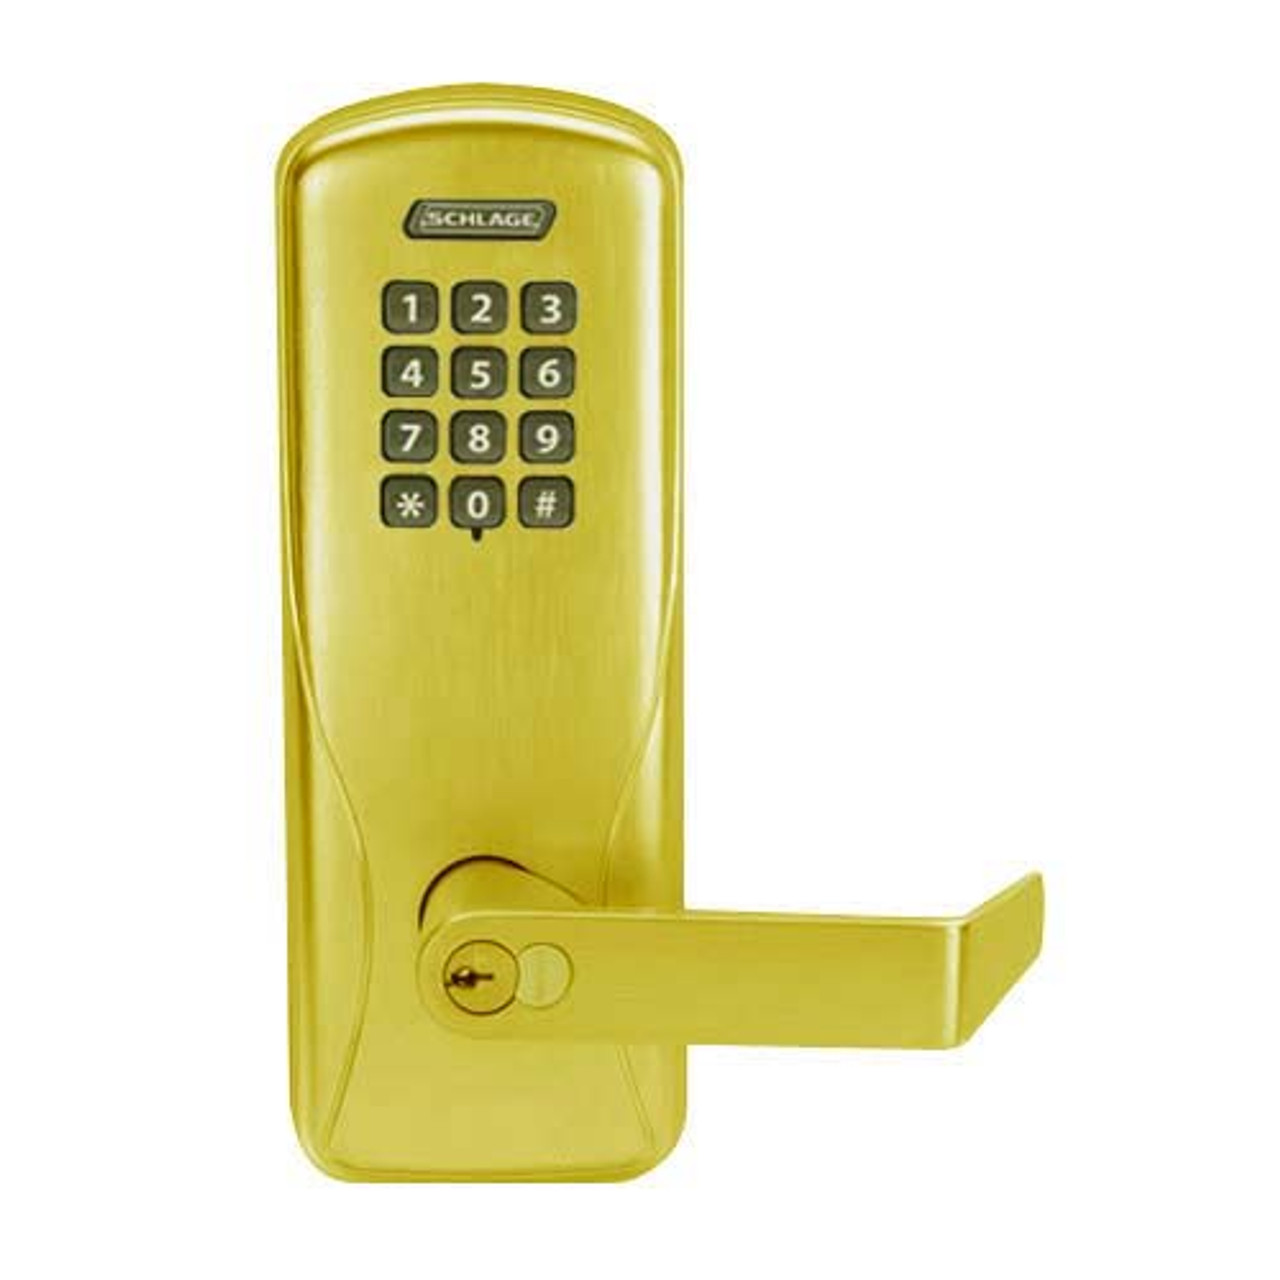 CO100-MS-50-KP-RHO-RD-605 Schlage Standalone Mortise Electronic Keypad locks in Bright Brass